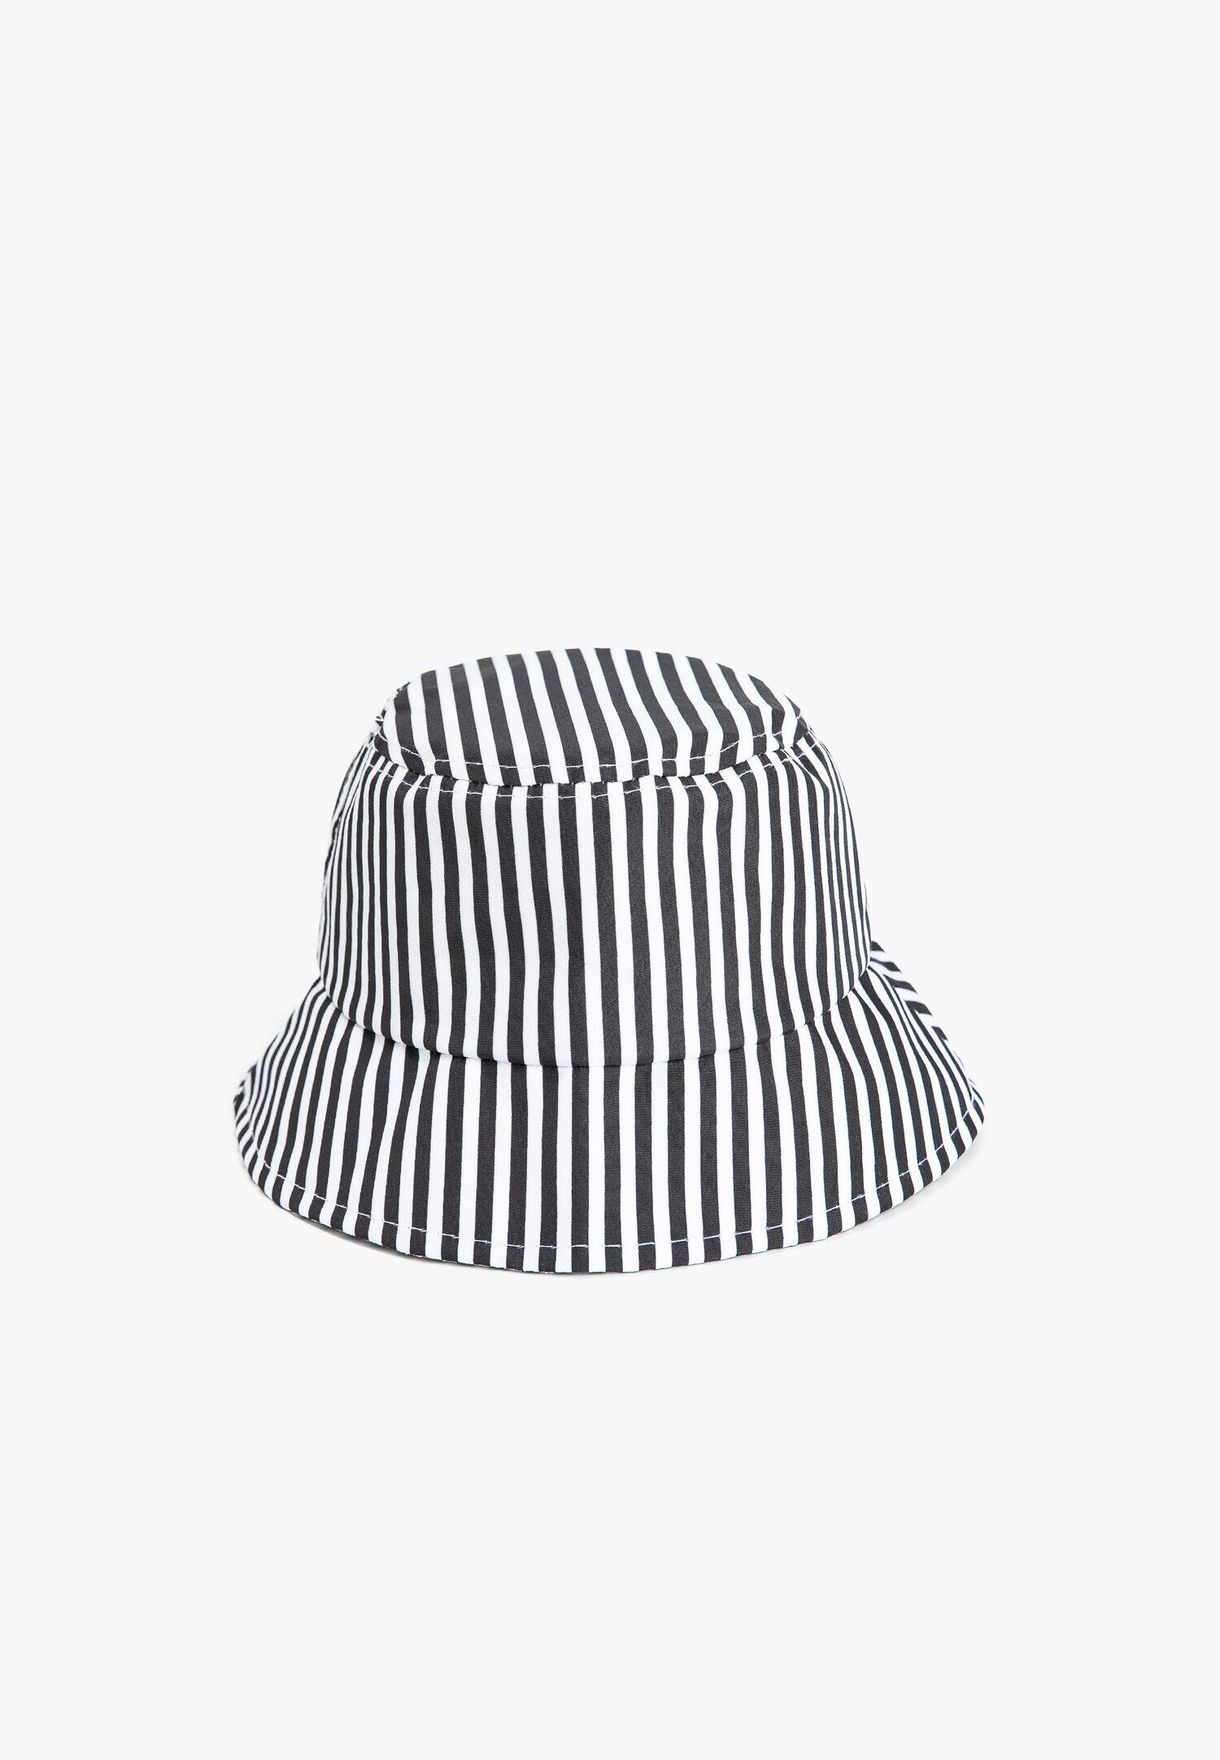 Printed Embroidered Bucket Hat